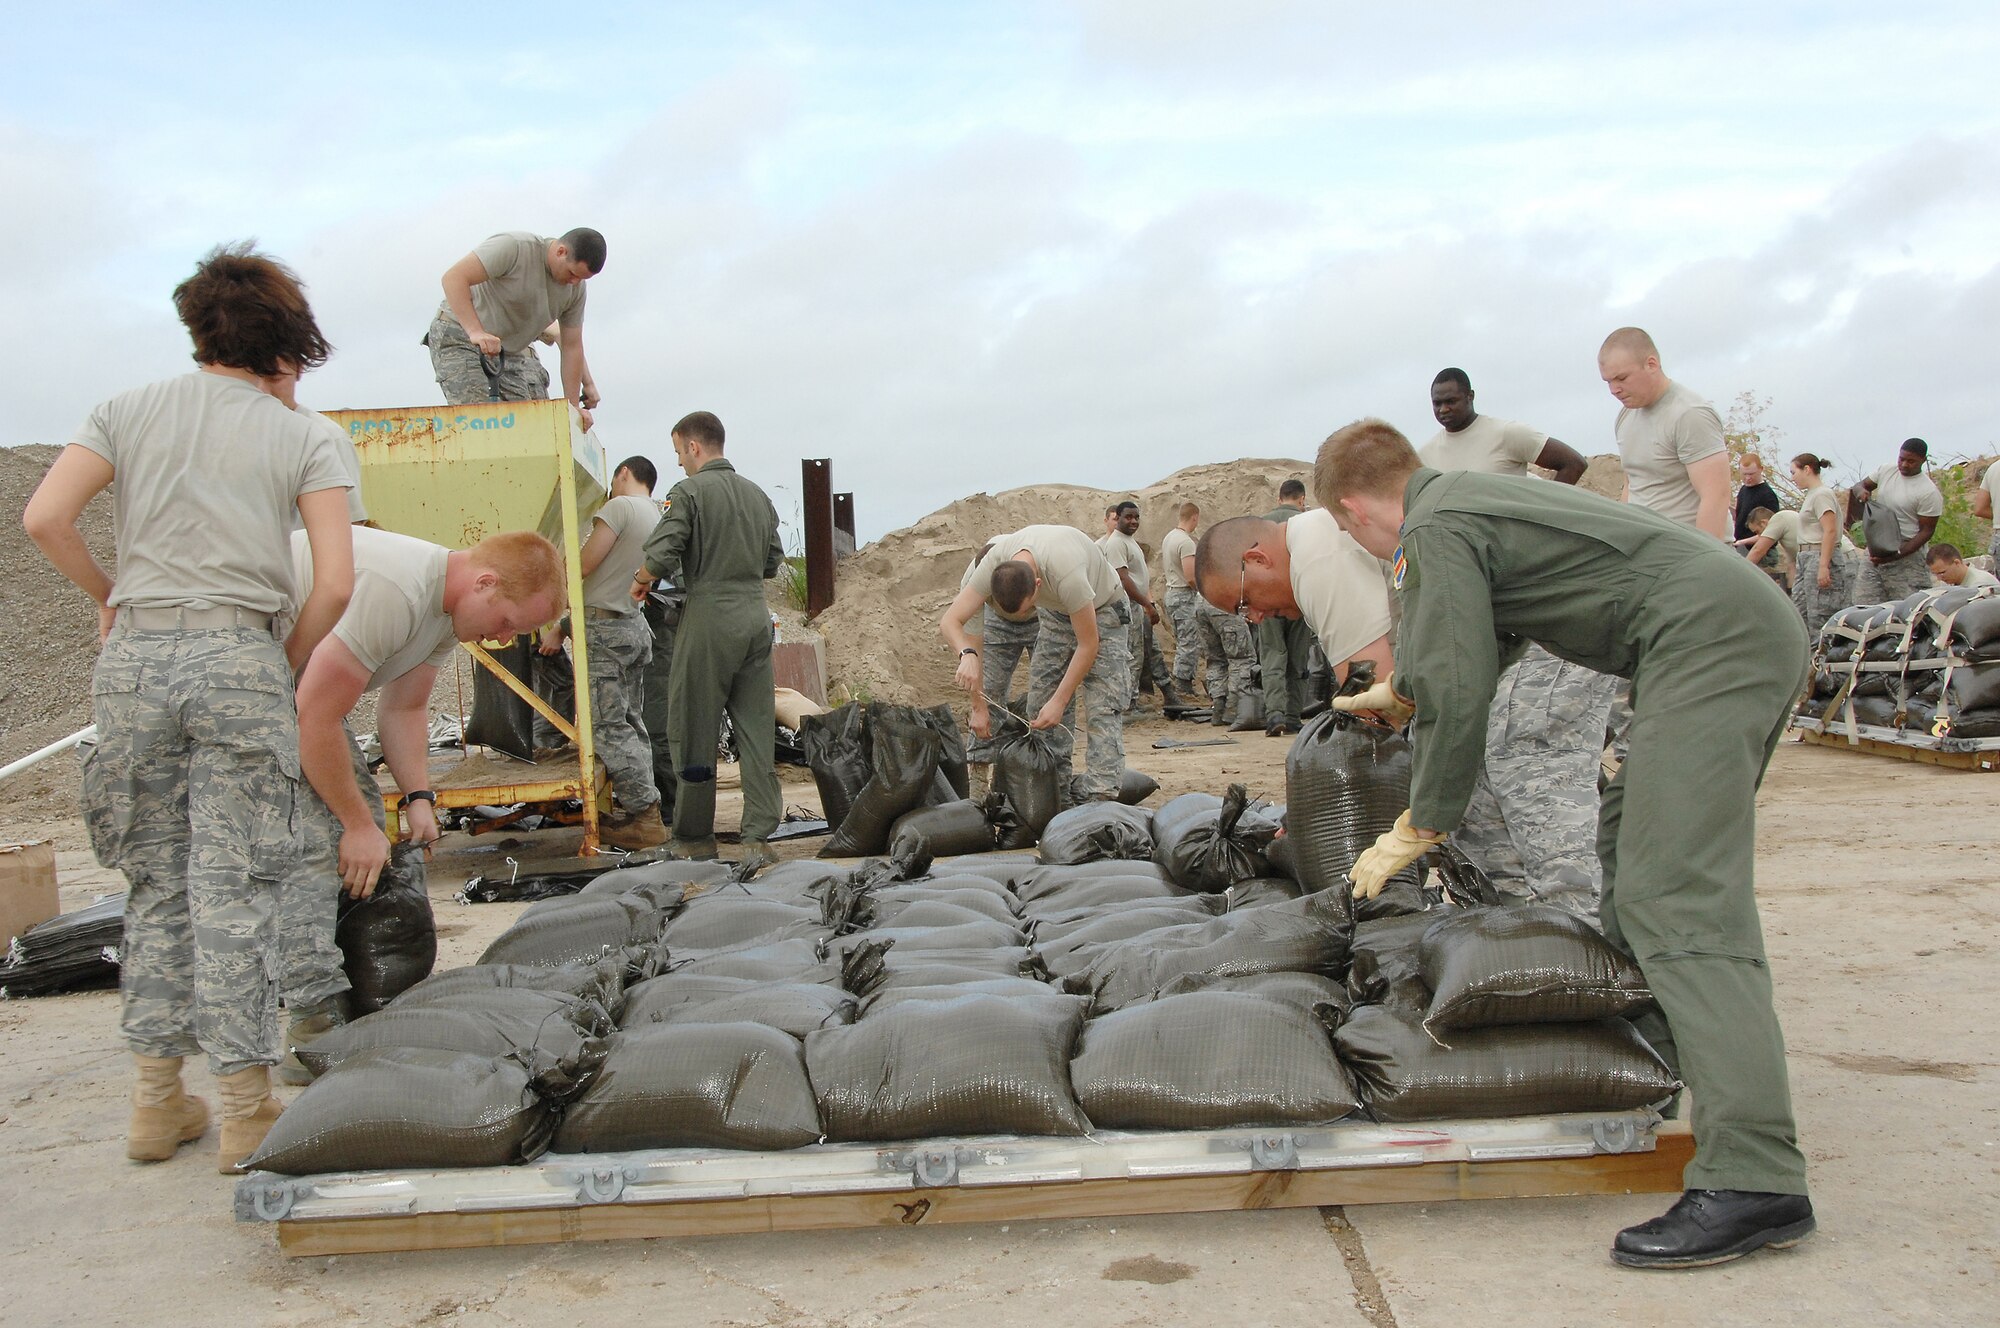 OFFUTT AIR FORCE BASE, Neb. -- Members of the Offutt community place sand bags on a palette to be transported to the 55th Wing Parking lot where Safety Training was being conducted.AF Photo by Dana Heard